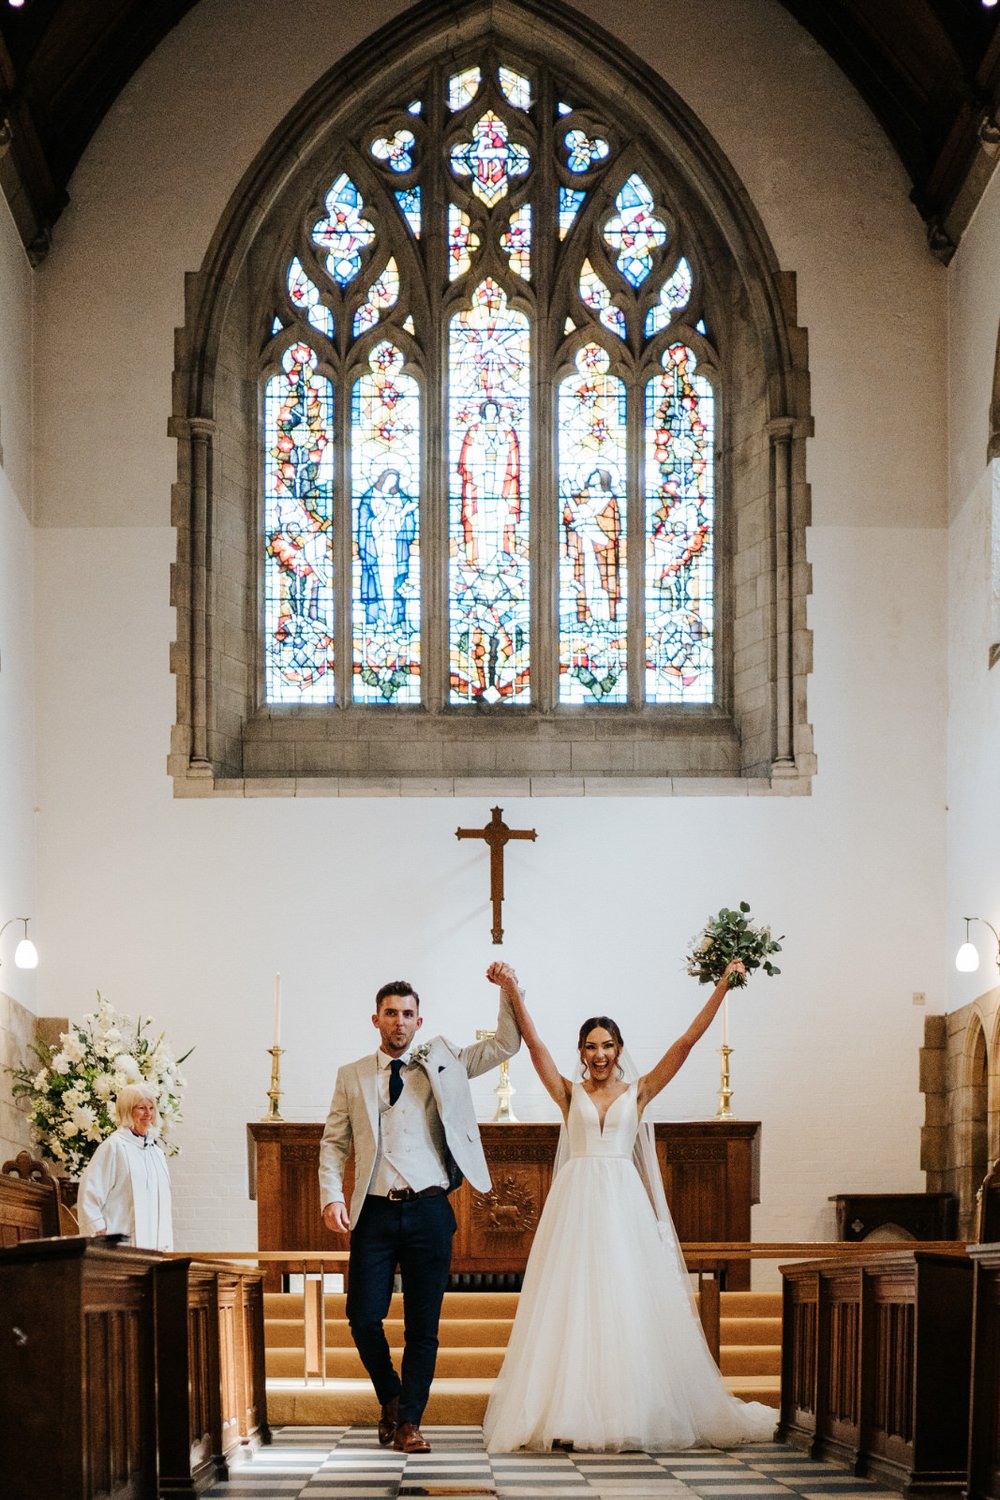 Bride and groom walk back down the aisle at church wedding while bride lifts her hands and bouquet in excitement 